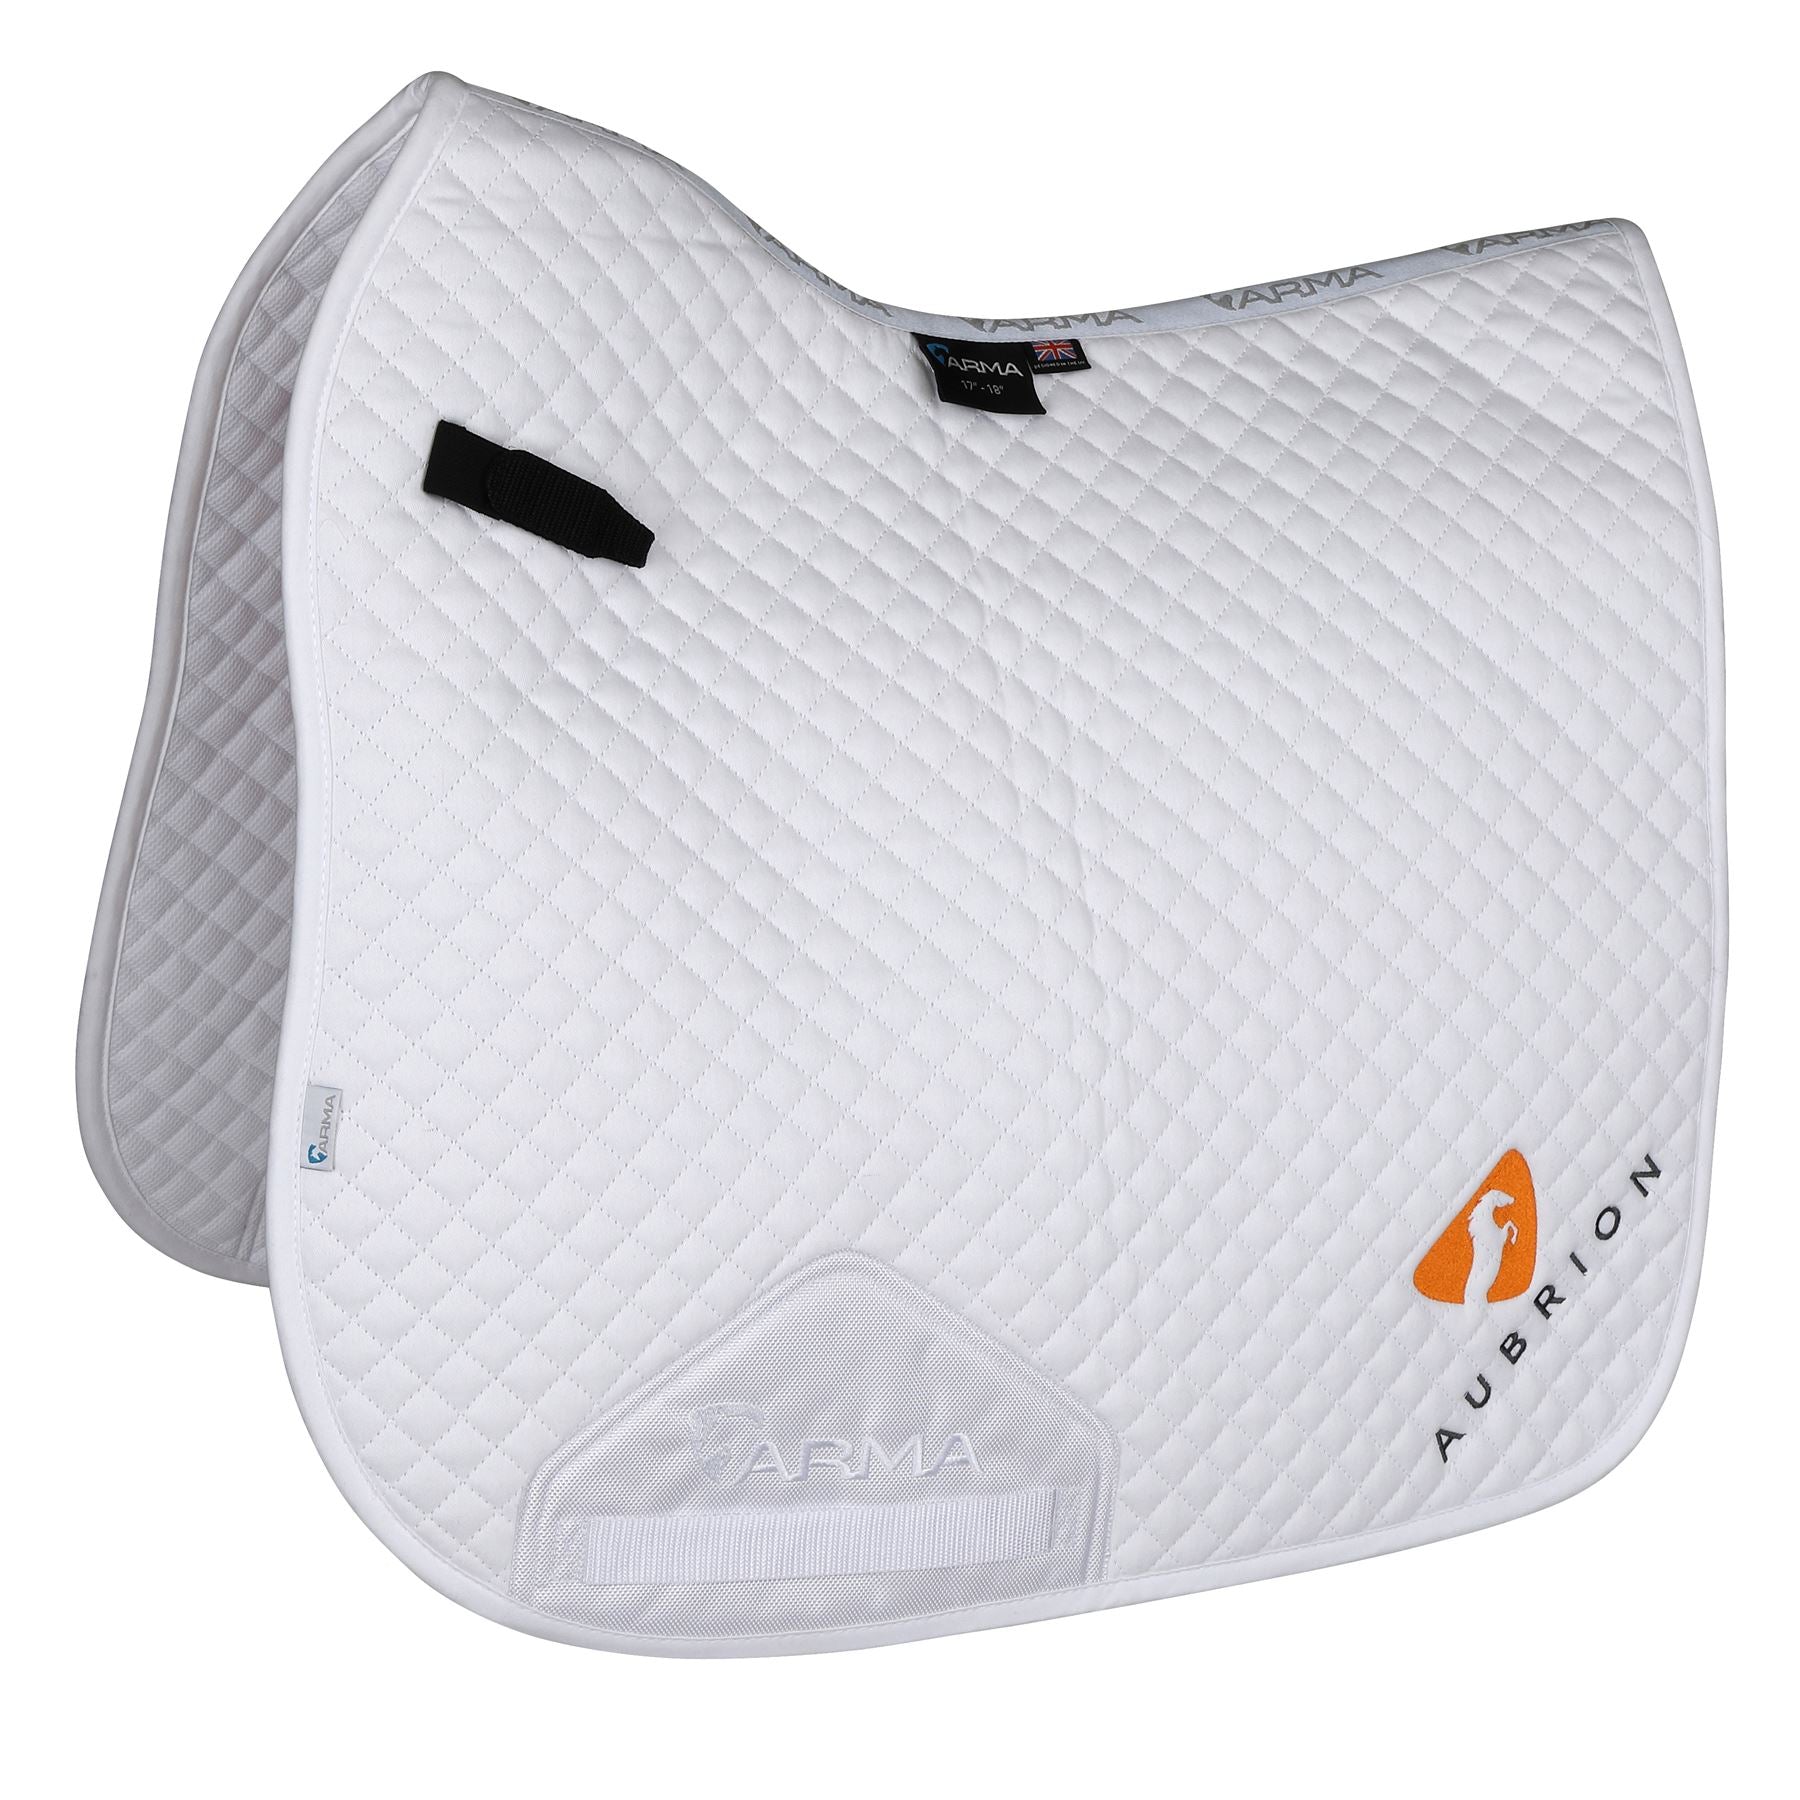 Aubrion Branded Dressage Saddlecloth - Just Horse Riders